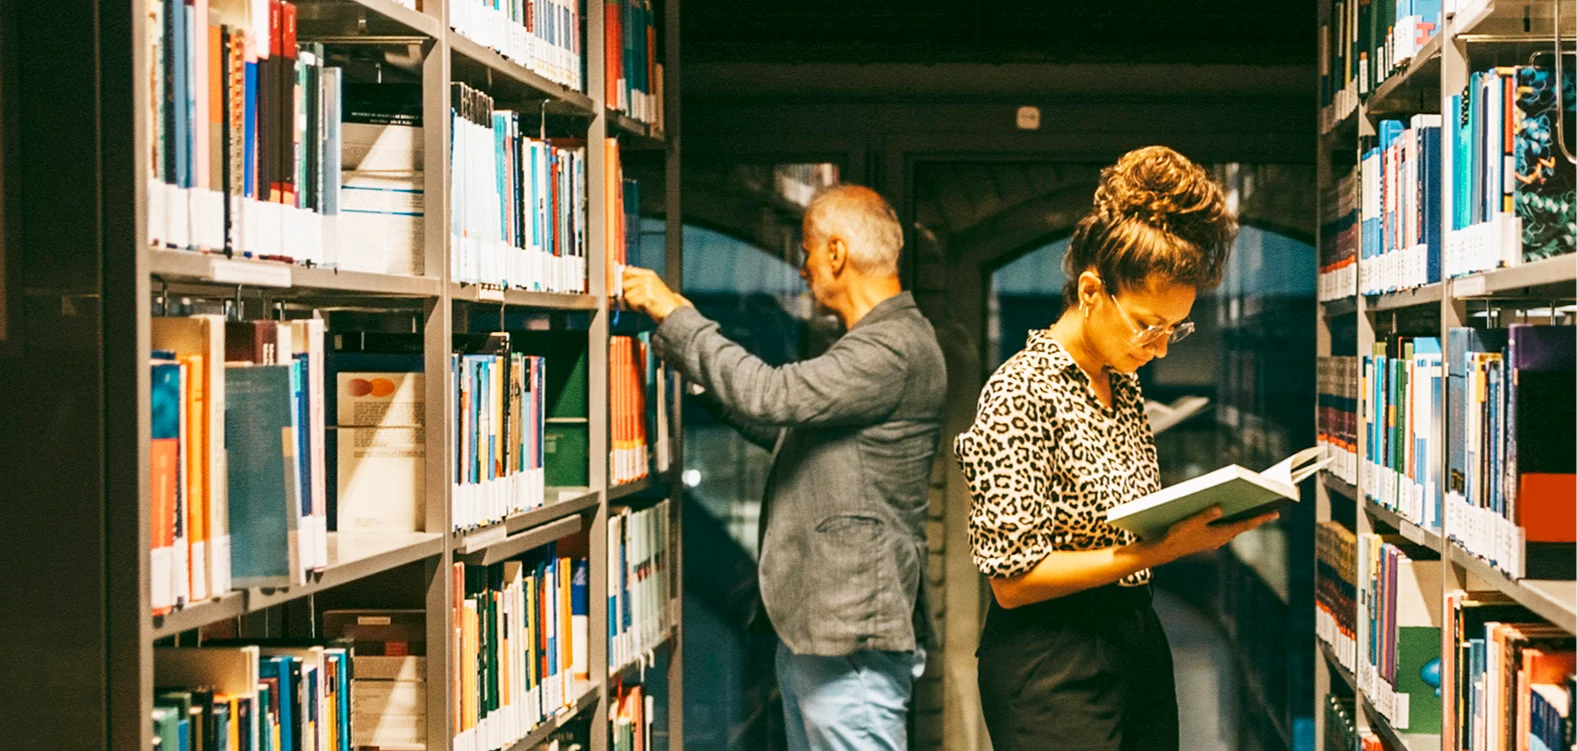 A man and a woman stand in a library looking at books on the shelves.